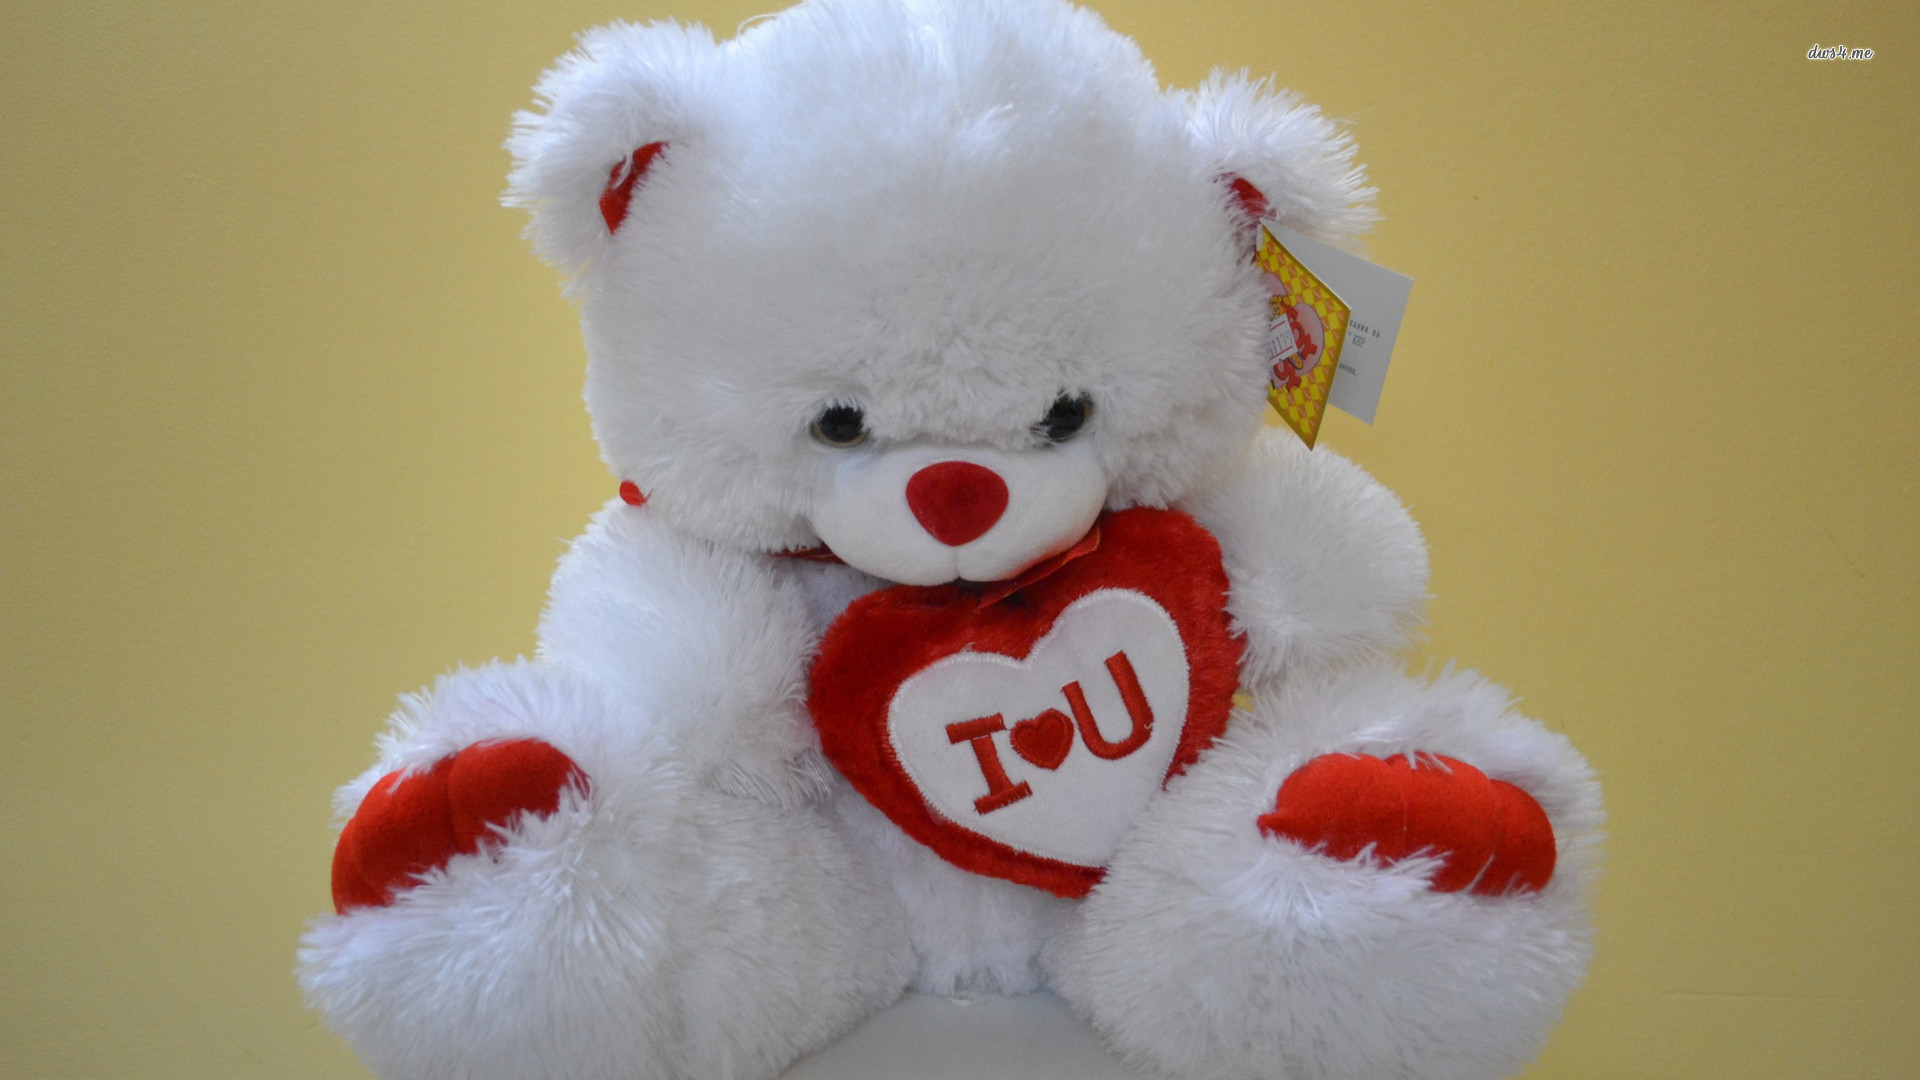 1920x1080 Very Cute Teddy Bears wallpaper images about Teddy Bear Day on Pinterest  Teddy day, Teddy 